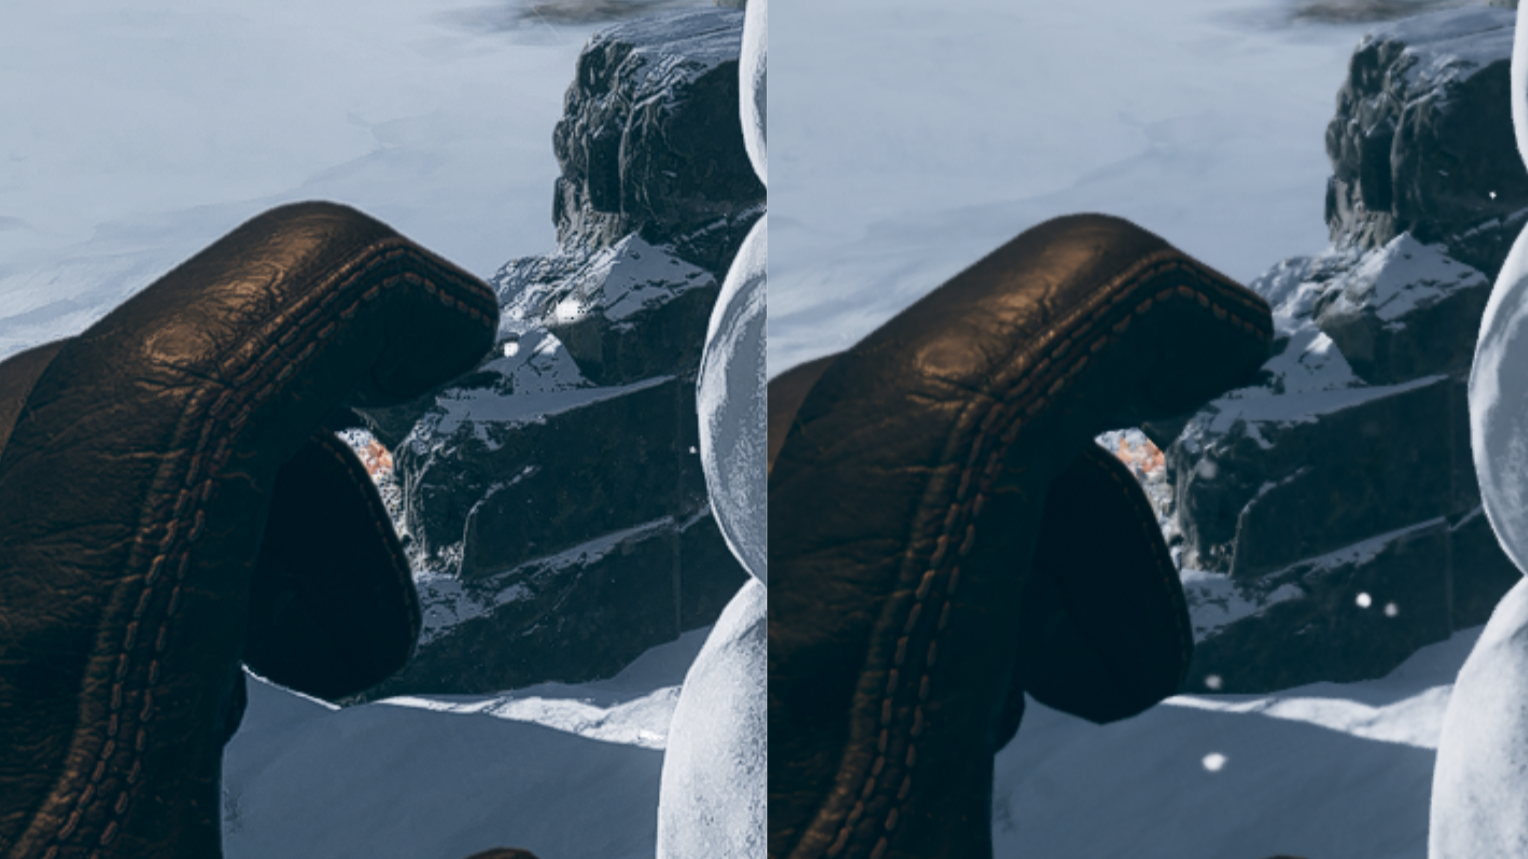 A comparison image showing a snowy scene in Deathloop. On the left is the scene rendered with FSR 2.0, on the right is it rendered at native 1440p.